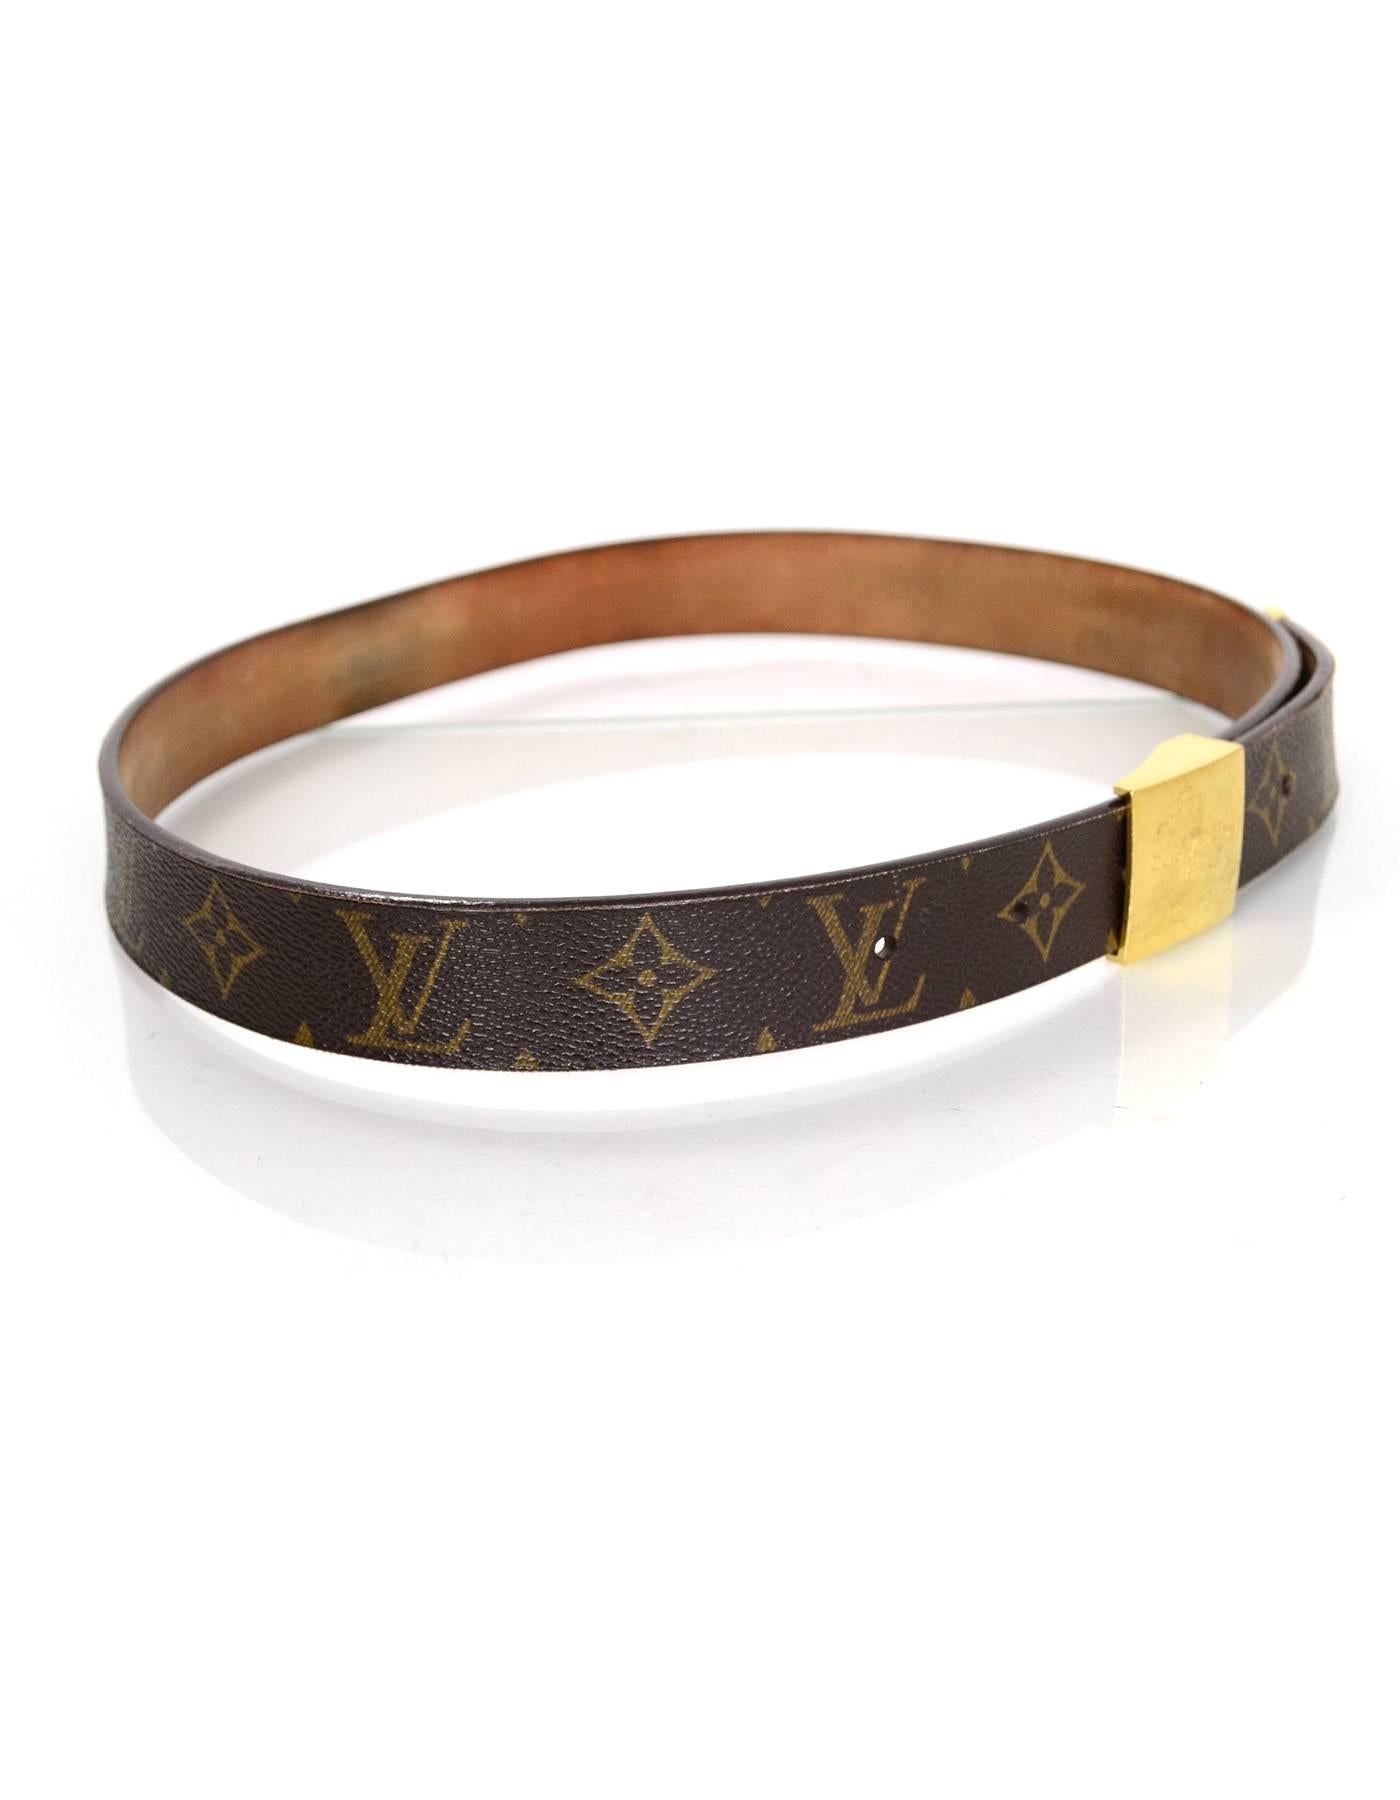 Louis Vuitton Ceinture Carre Belt 

Made In: Buckle- France Belt- Spain
Year of Production: 2001
Color: Tan and brown
Hardware: Goldtone
Materials: Coated canvas and leather
Closure/Opening: Stud and notch closure
Stamp: LB1021
Overall Condition: